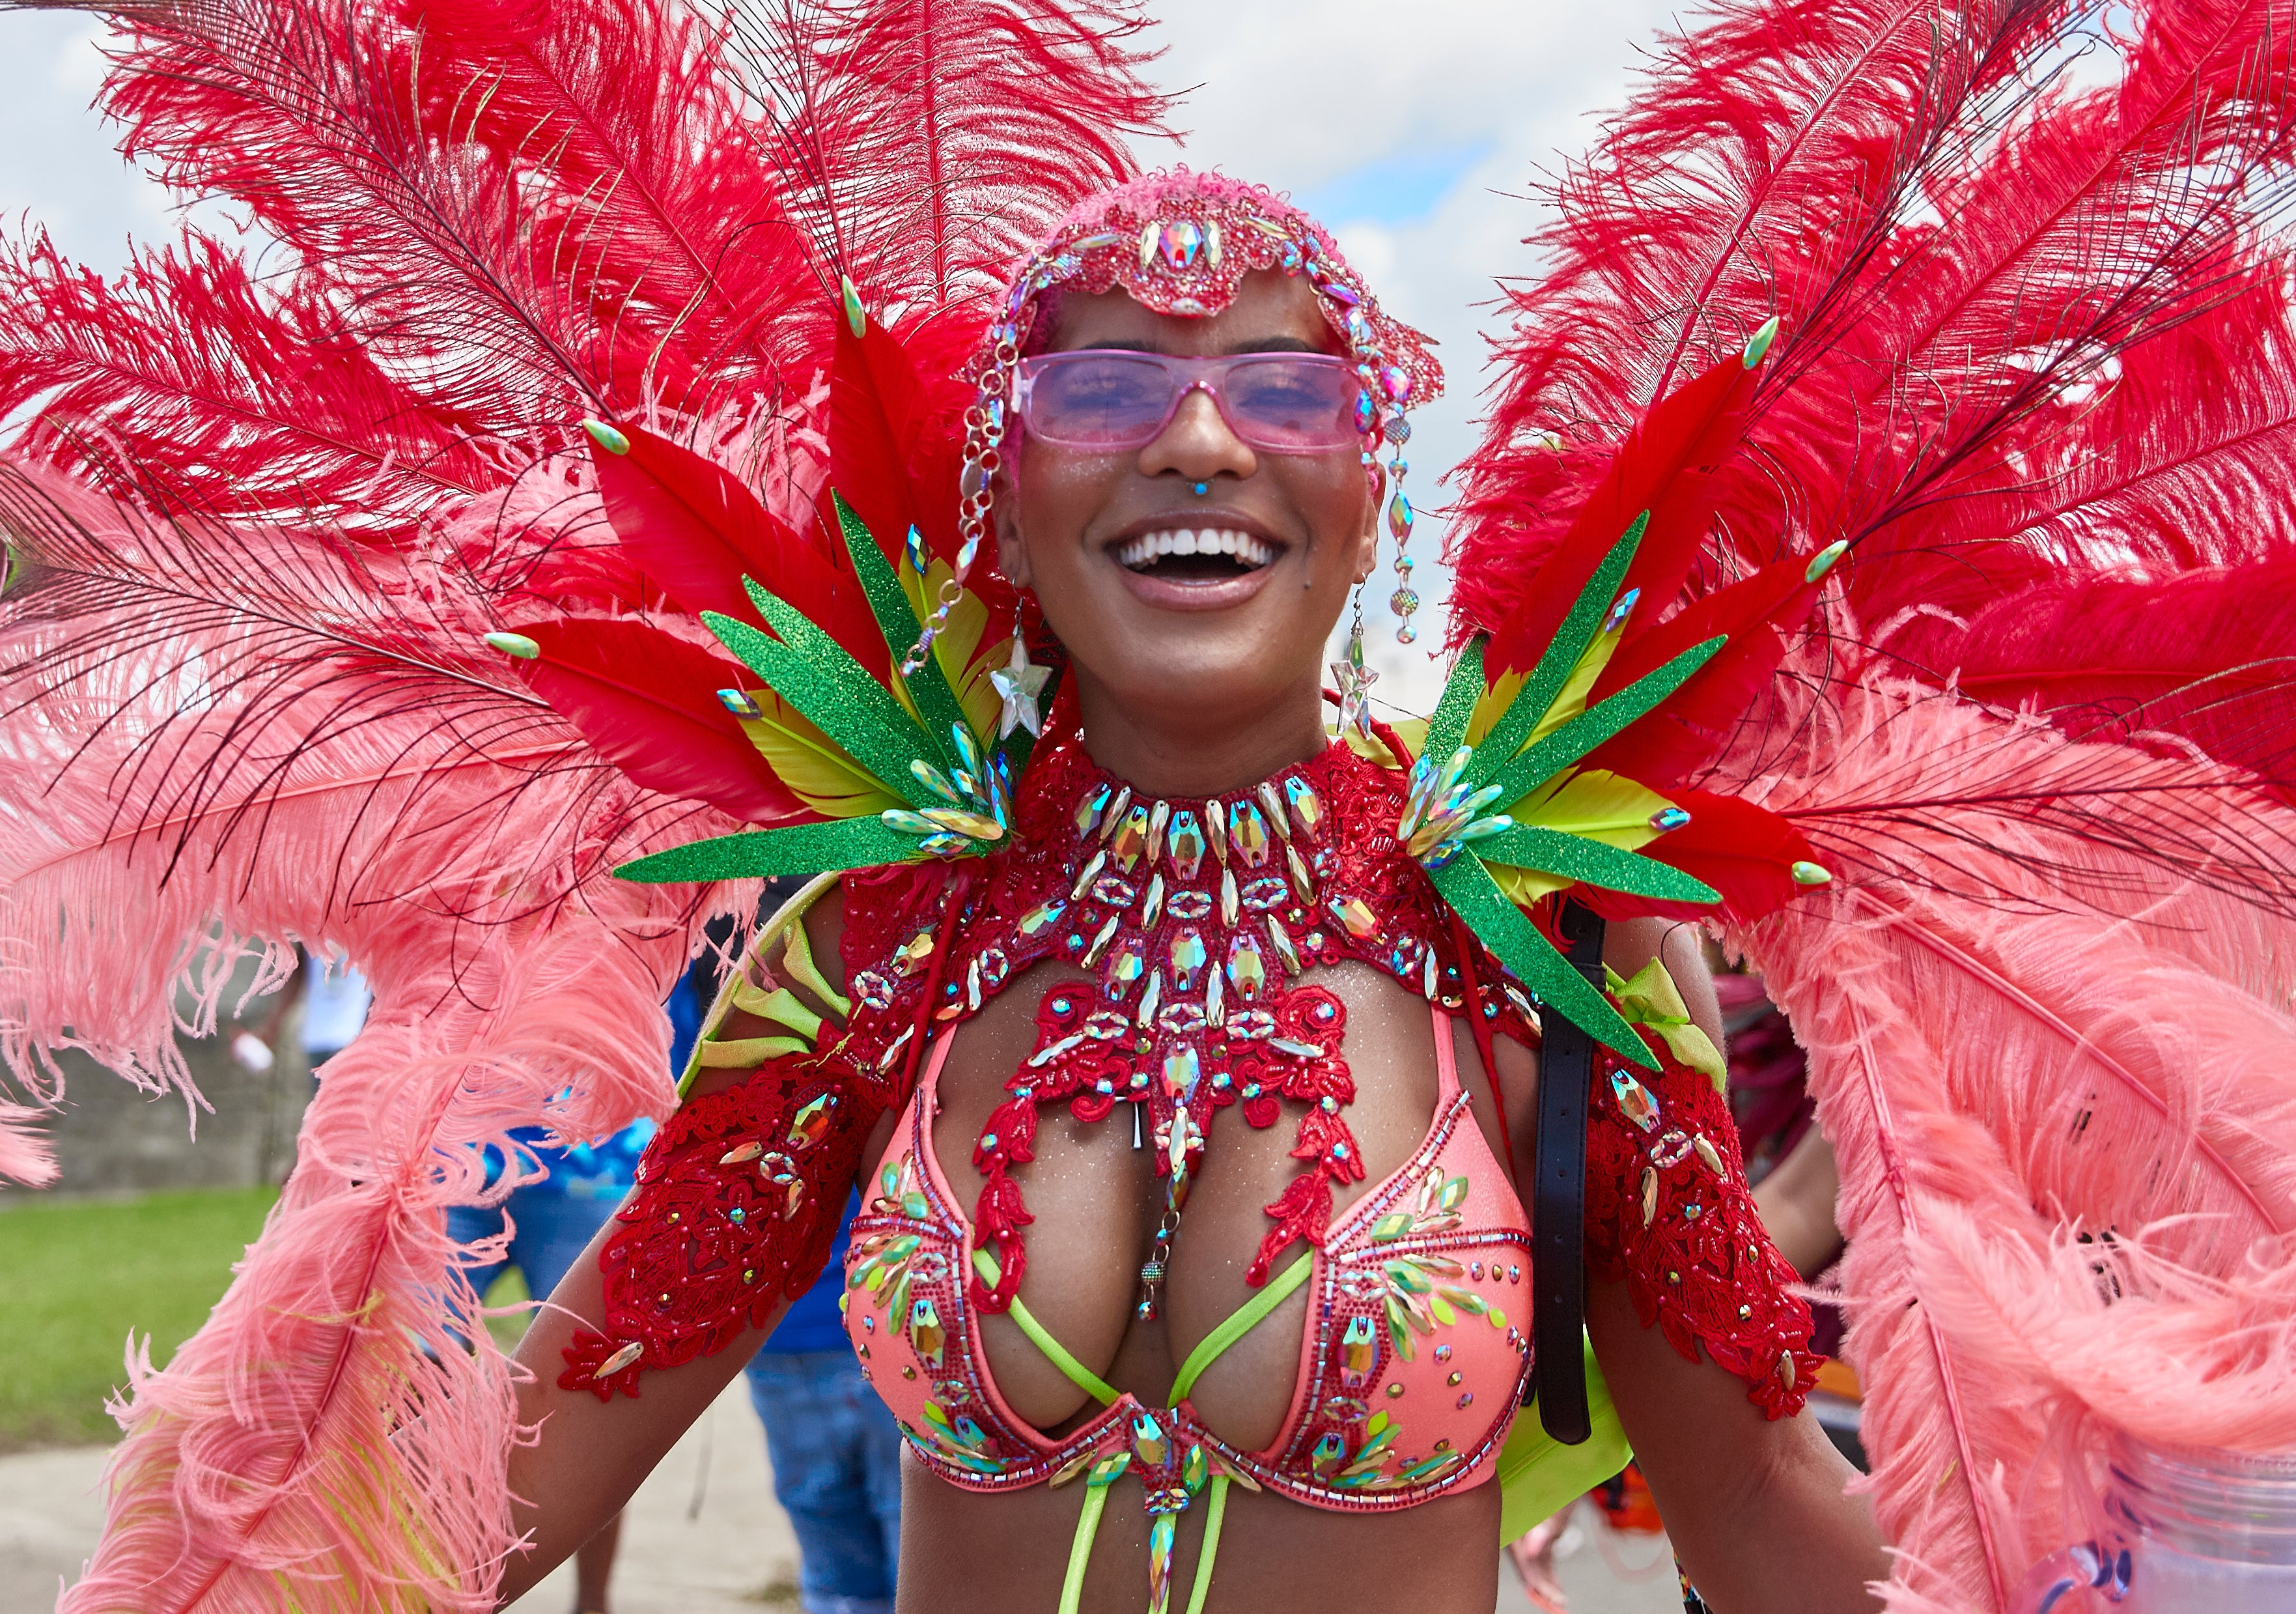 Beauty Moments From Caribbean Festival Crop Over 2019 in Barbados